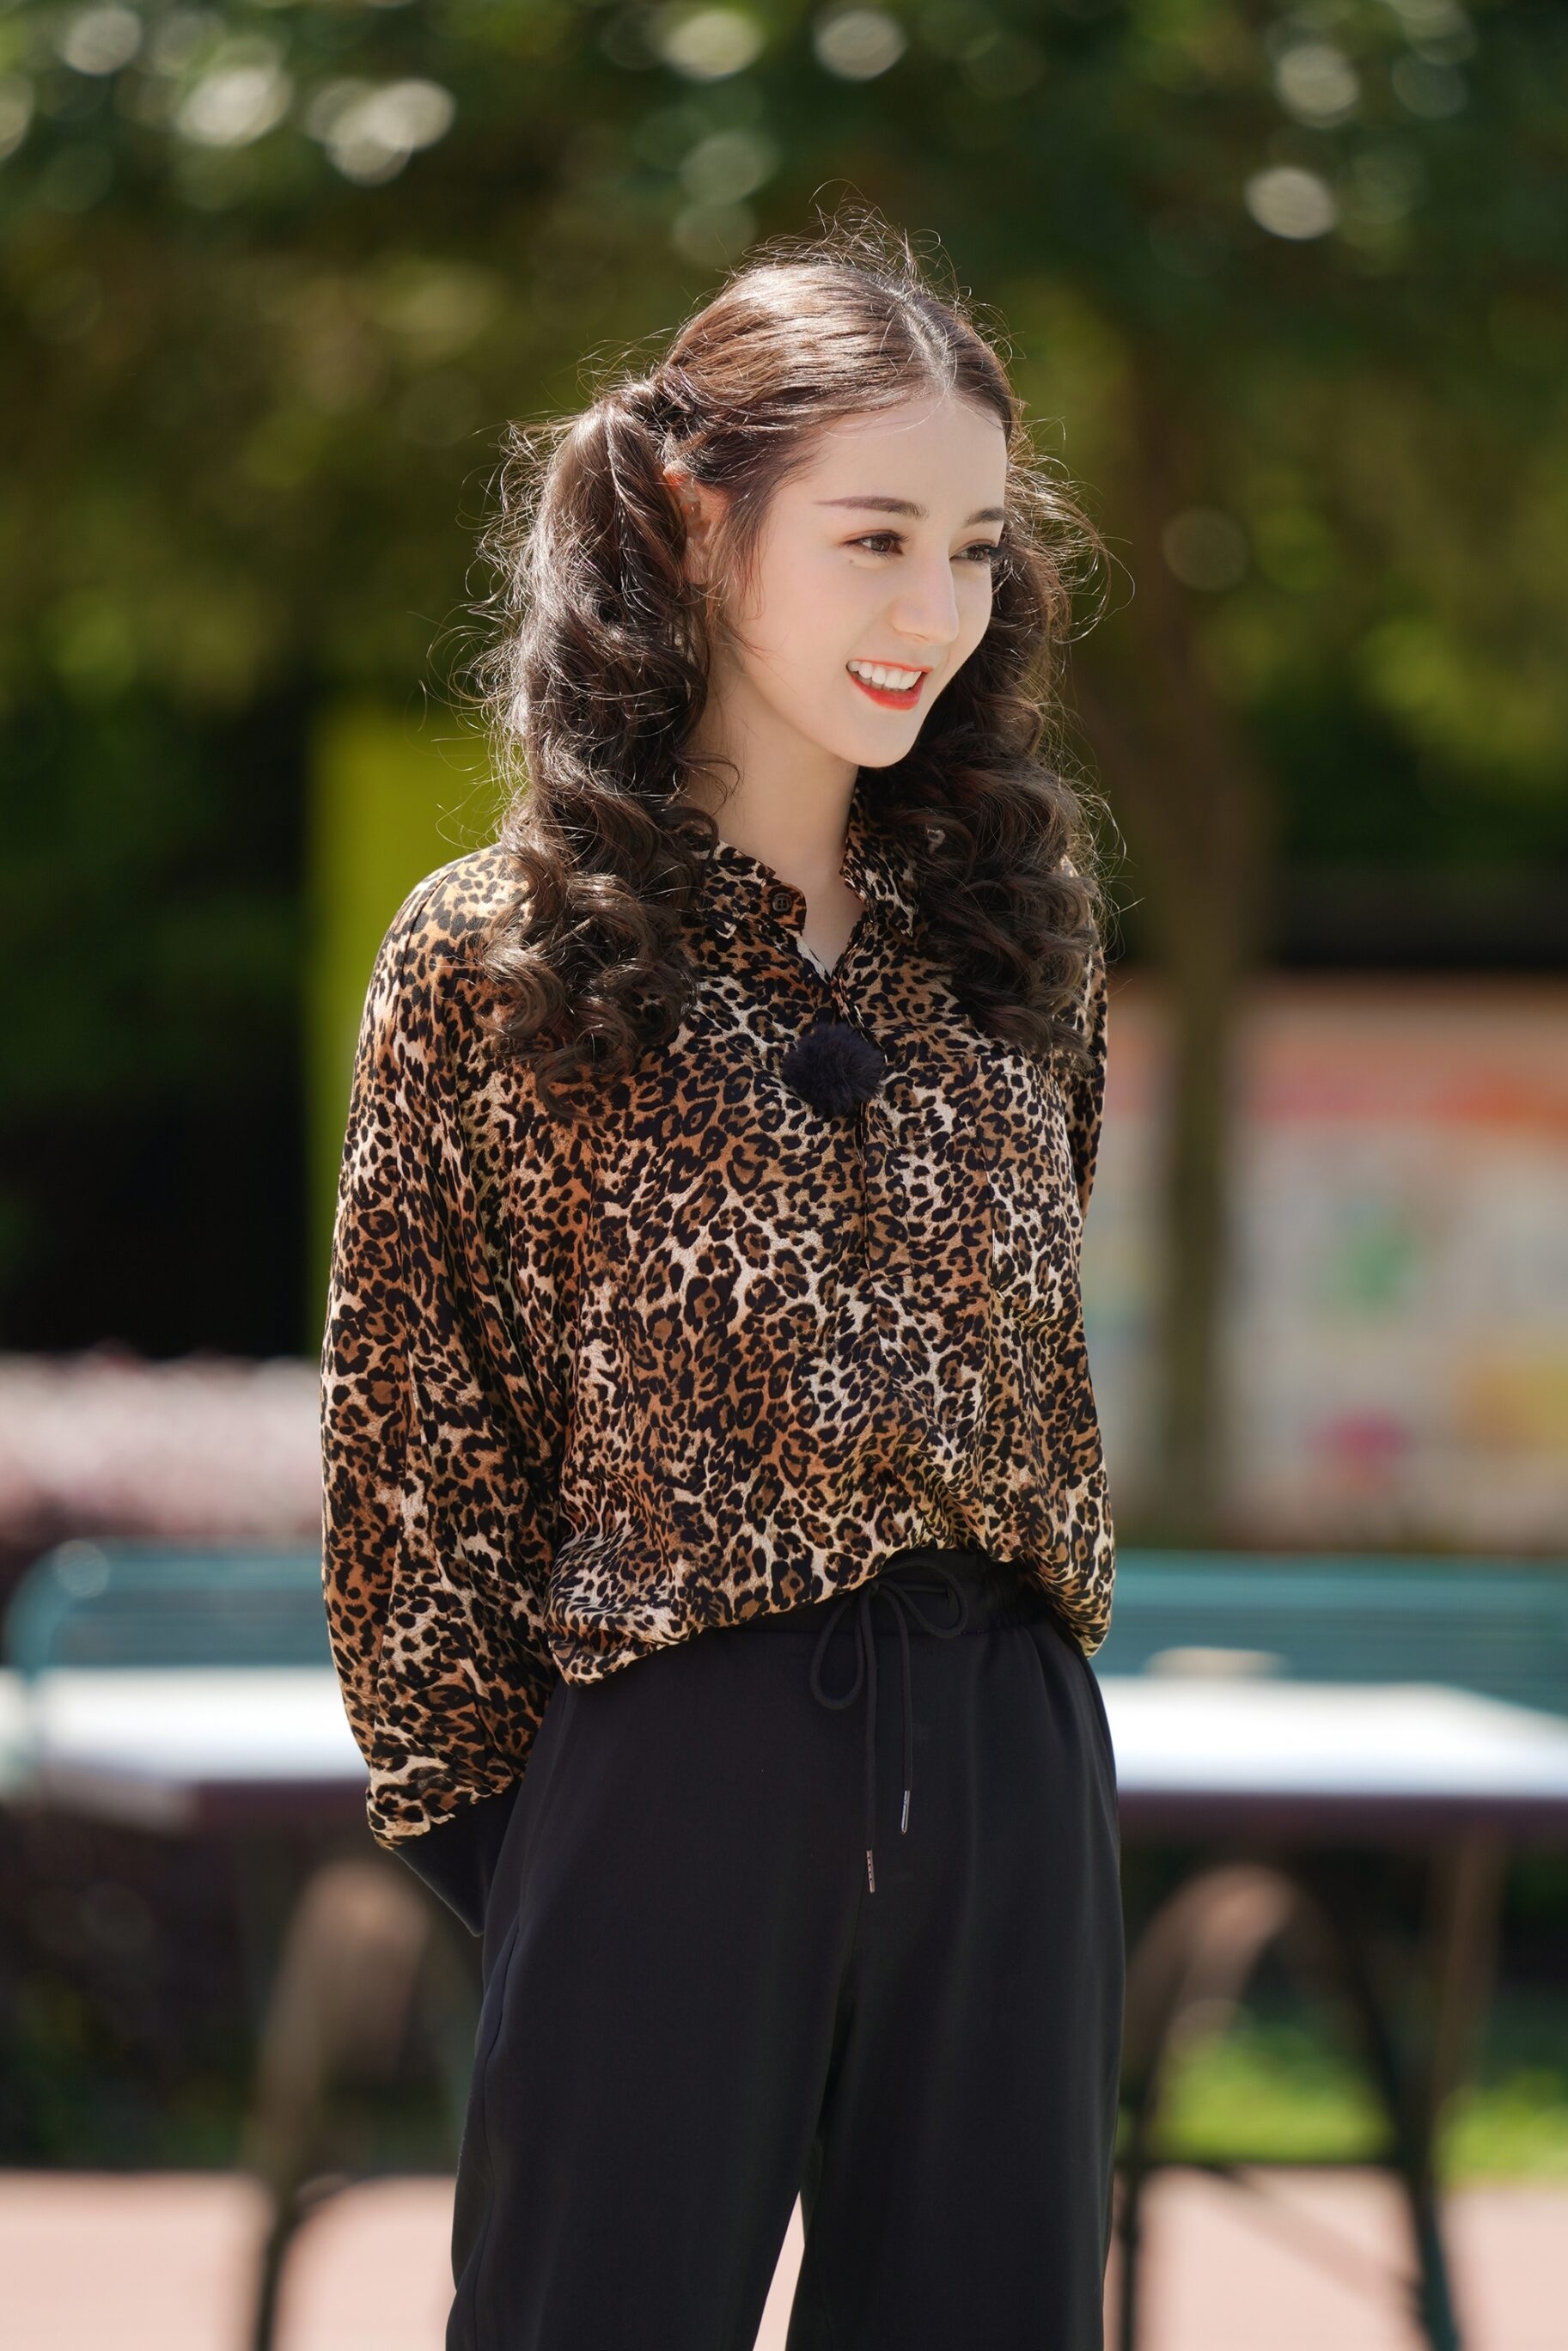 A Leopard Shirt + Strappy Heels